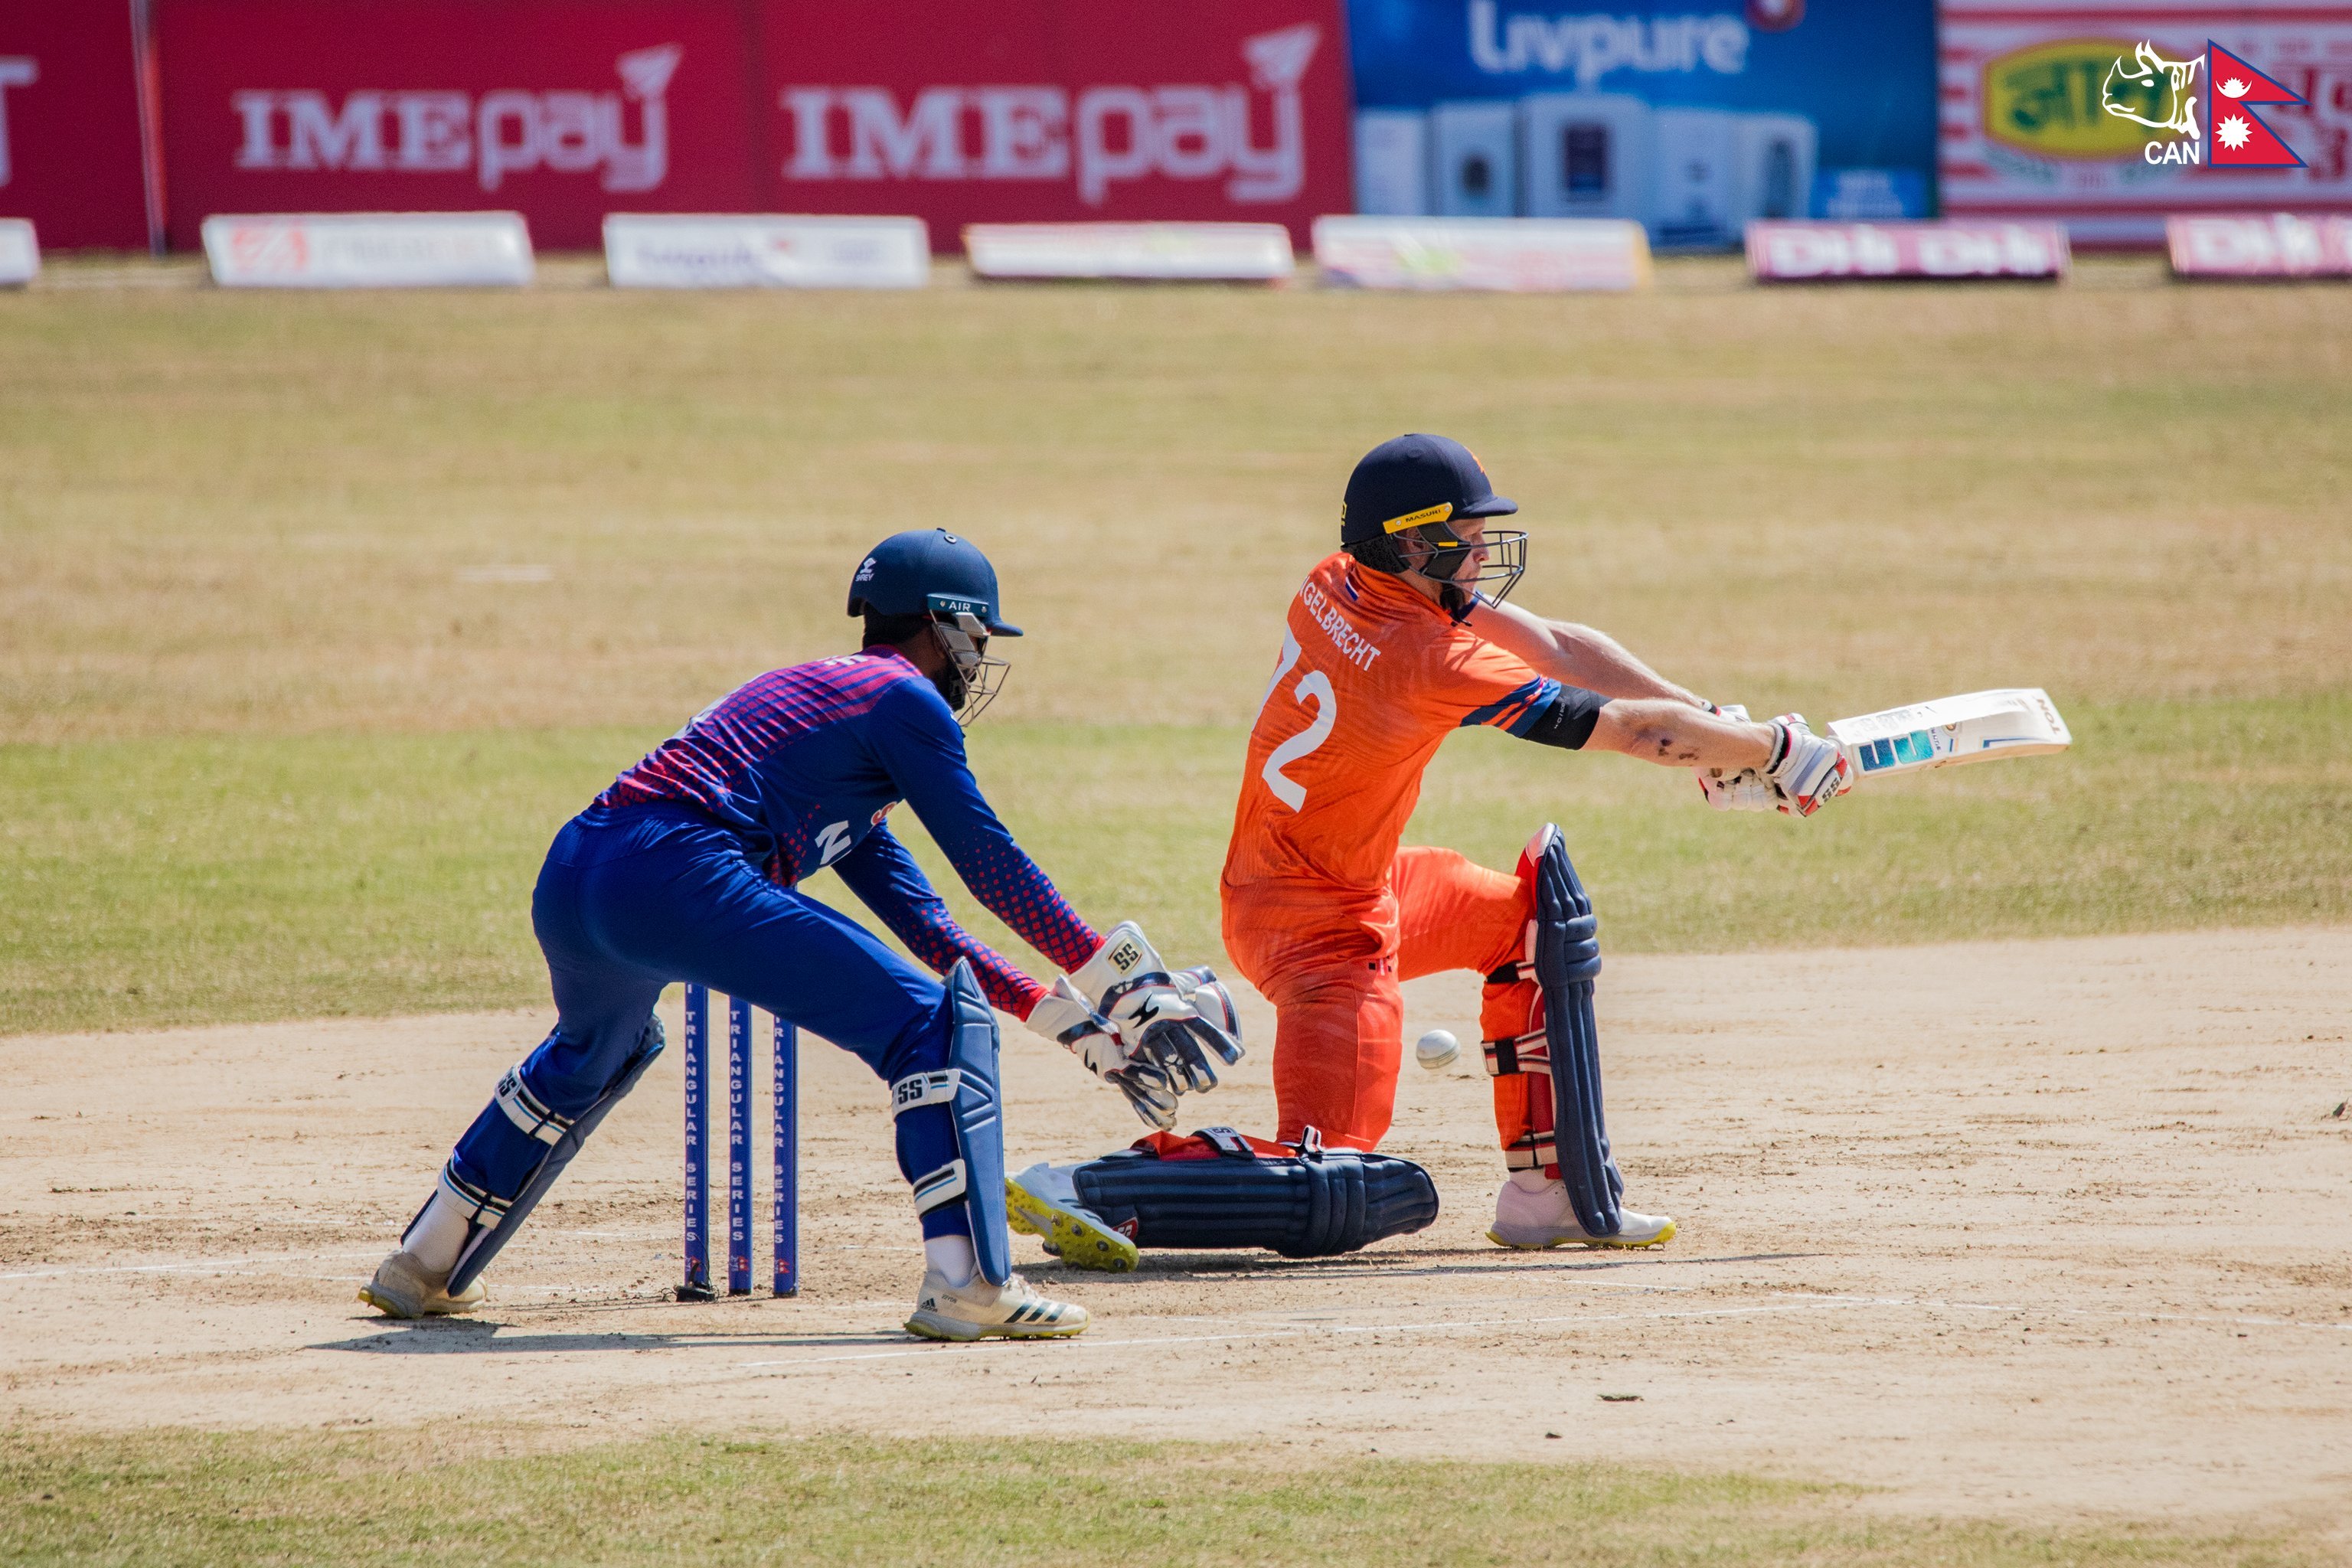 Netherlands sets formidable target of 185 runs for Nepal in T20I clash